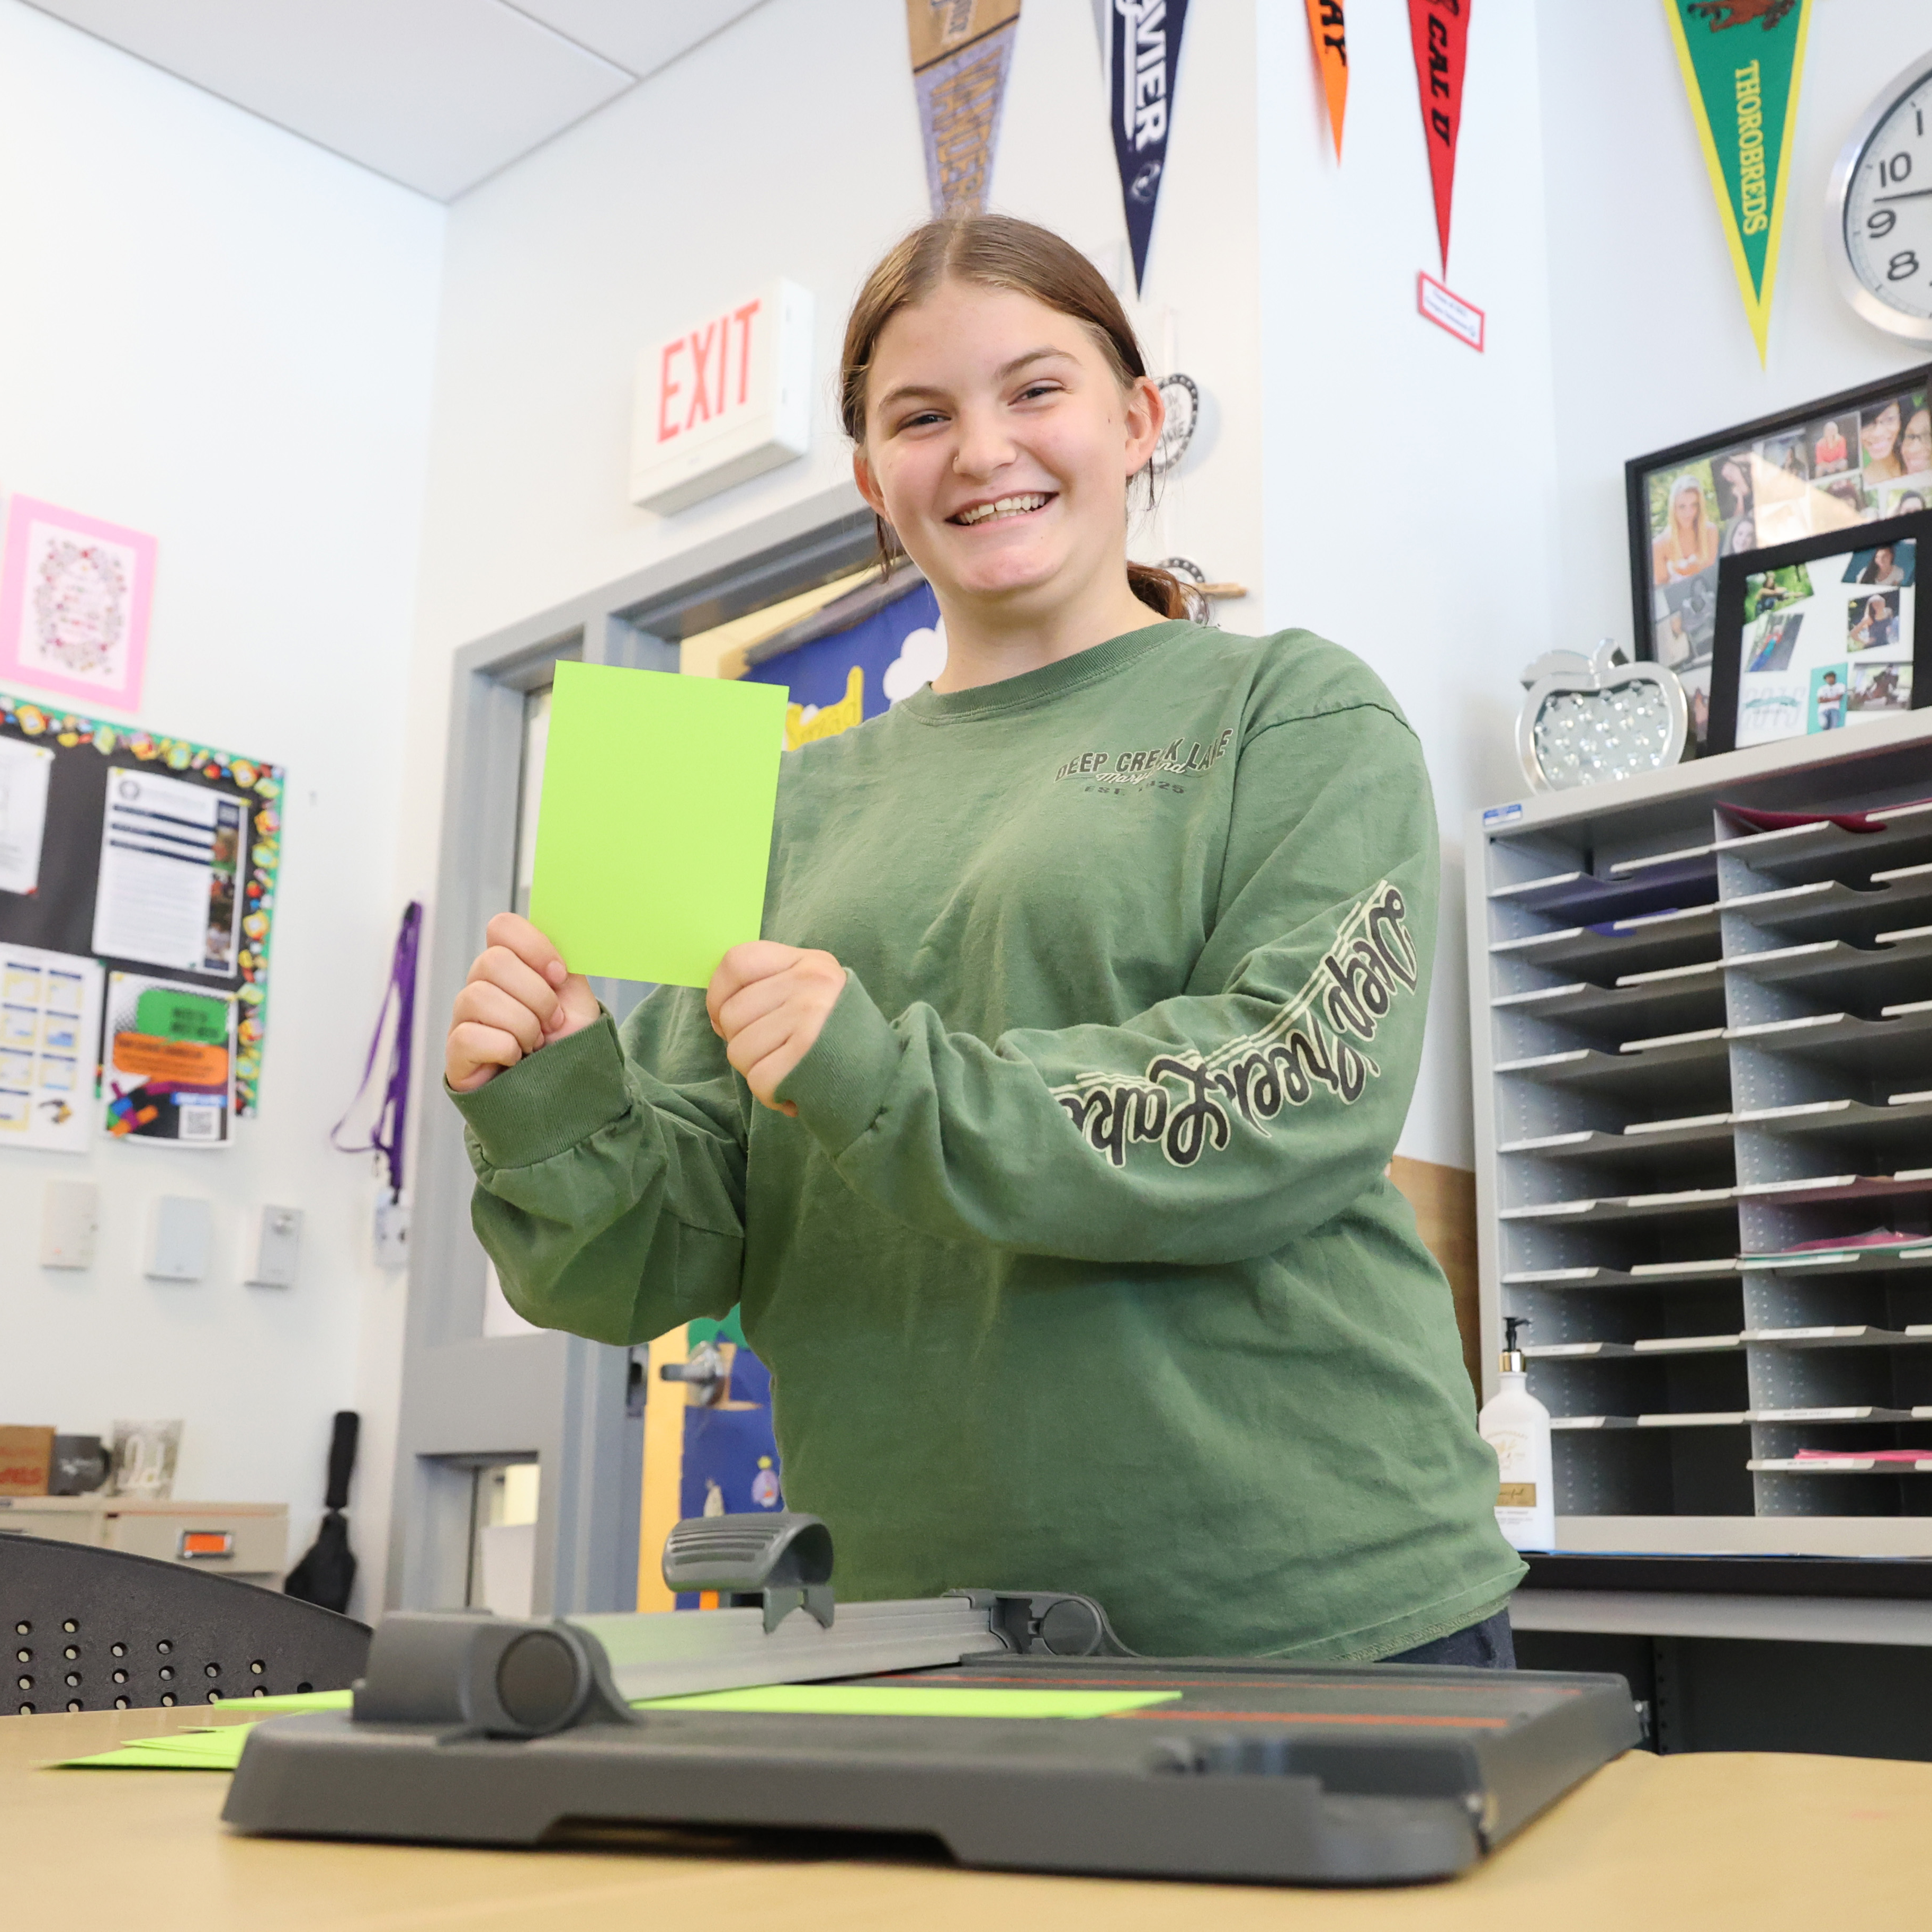 A female student shows the green paper that she just sliced using a paper cutter.